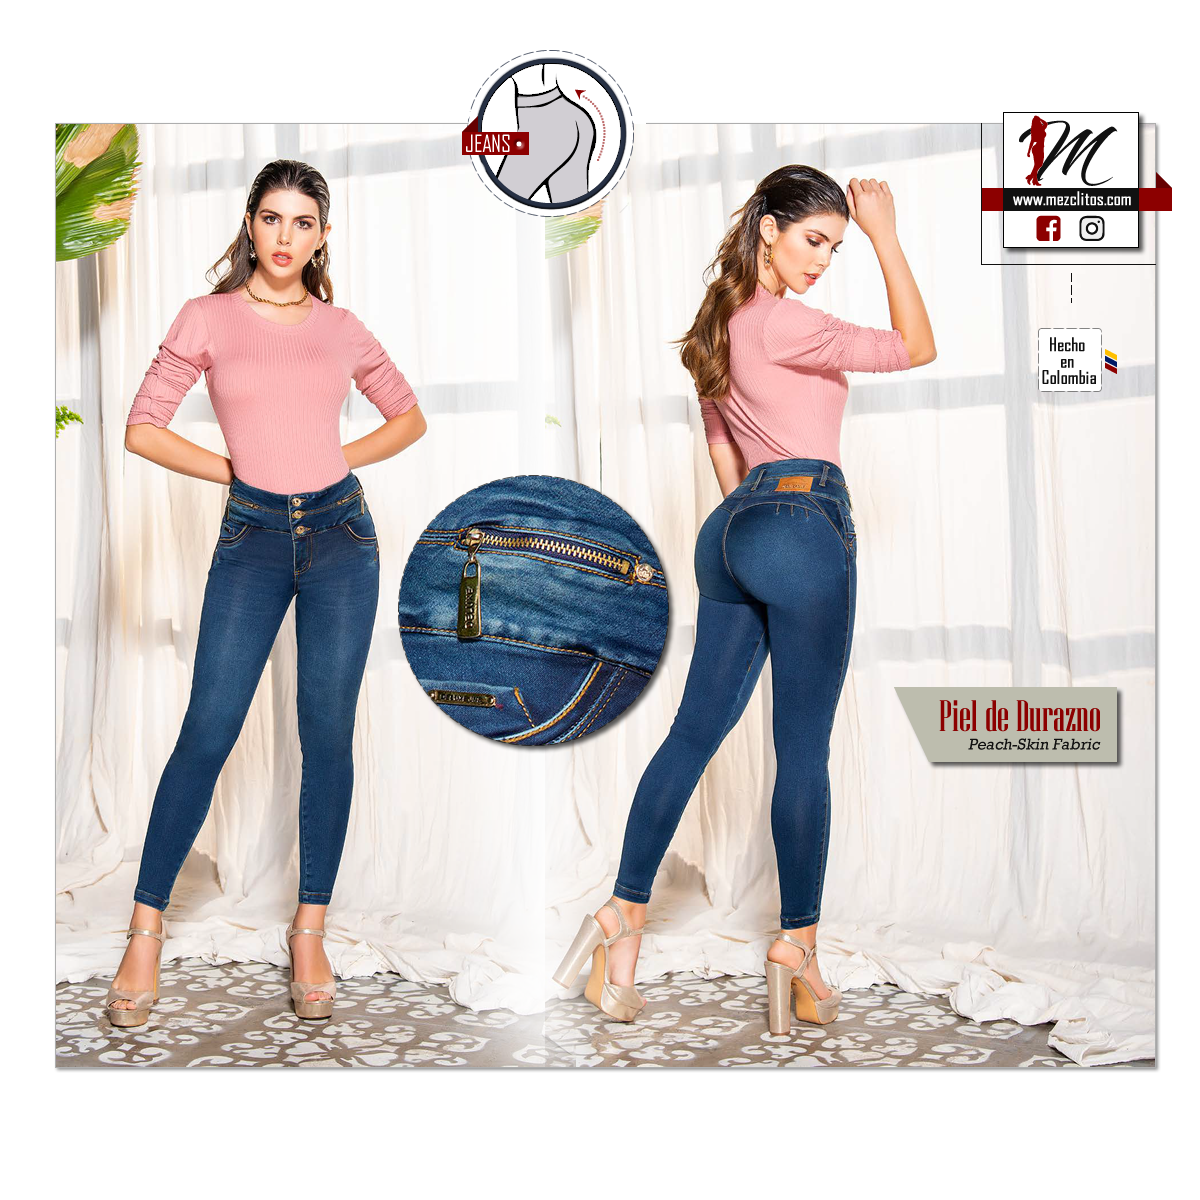 Deluxe Jeans 1117 - 100% Colombianos